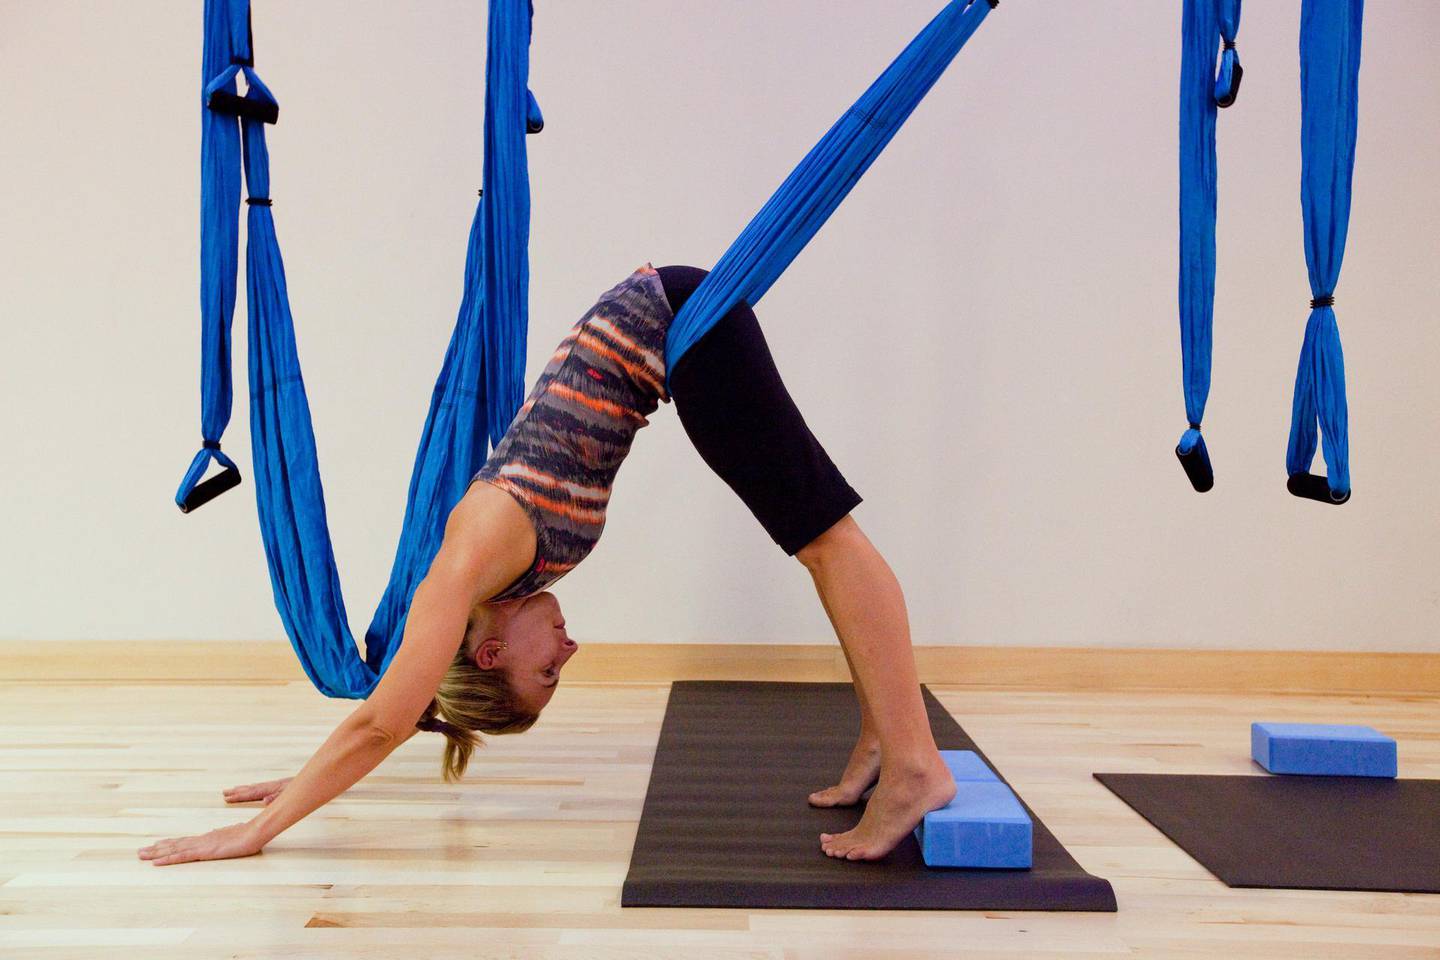 Dubai, United Arab Emirates - June 14 2012 - The National's Melanie Swan uses a  sling to push her deeper into downward dog at a Swing Yoga class at Fitness First in Dubai Motor City.  Swing Yoga is a form of yoga where students suspend themselves and conduct various poses with the help of a sling. The sling is made from parachute material and is suspended from the ceiling using rock climbing carabiners. Slings help move yoga students deeper into poses and allow for easier inversions. (Razan Alzayani / The National) 